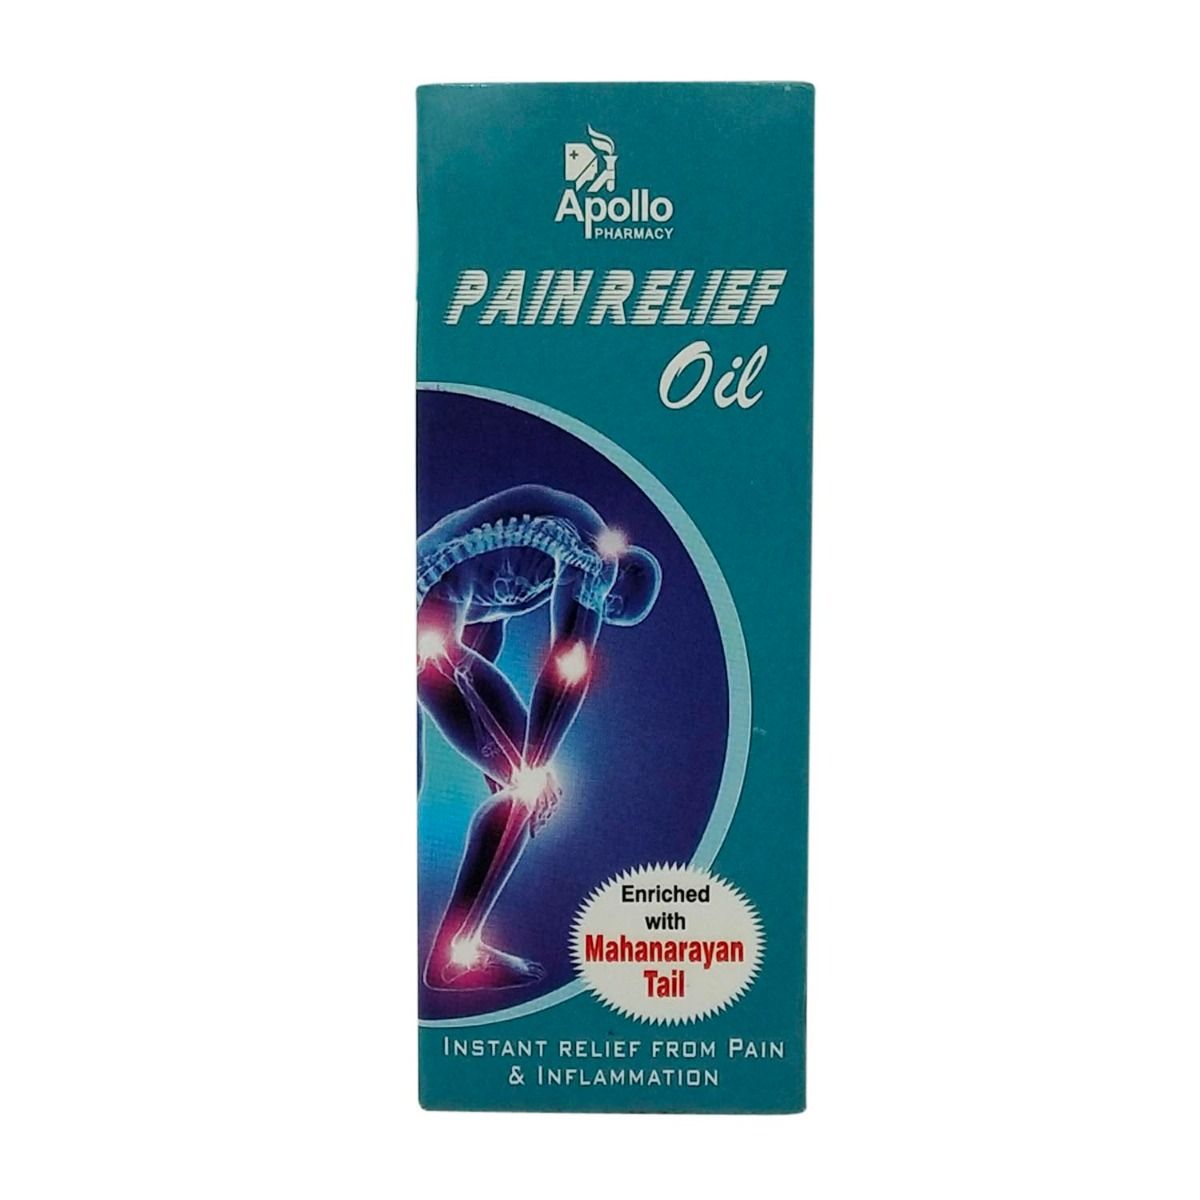 Apollo Pharmacy Pain Relief Oil, 60 ml, Pack of 1 